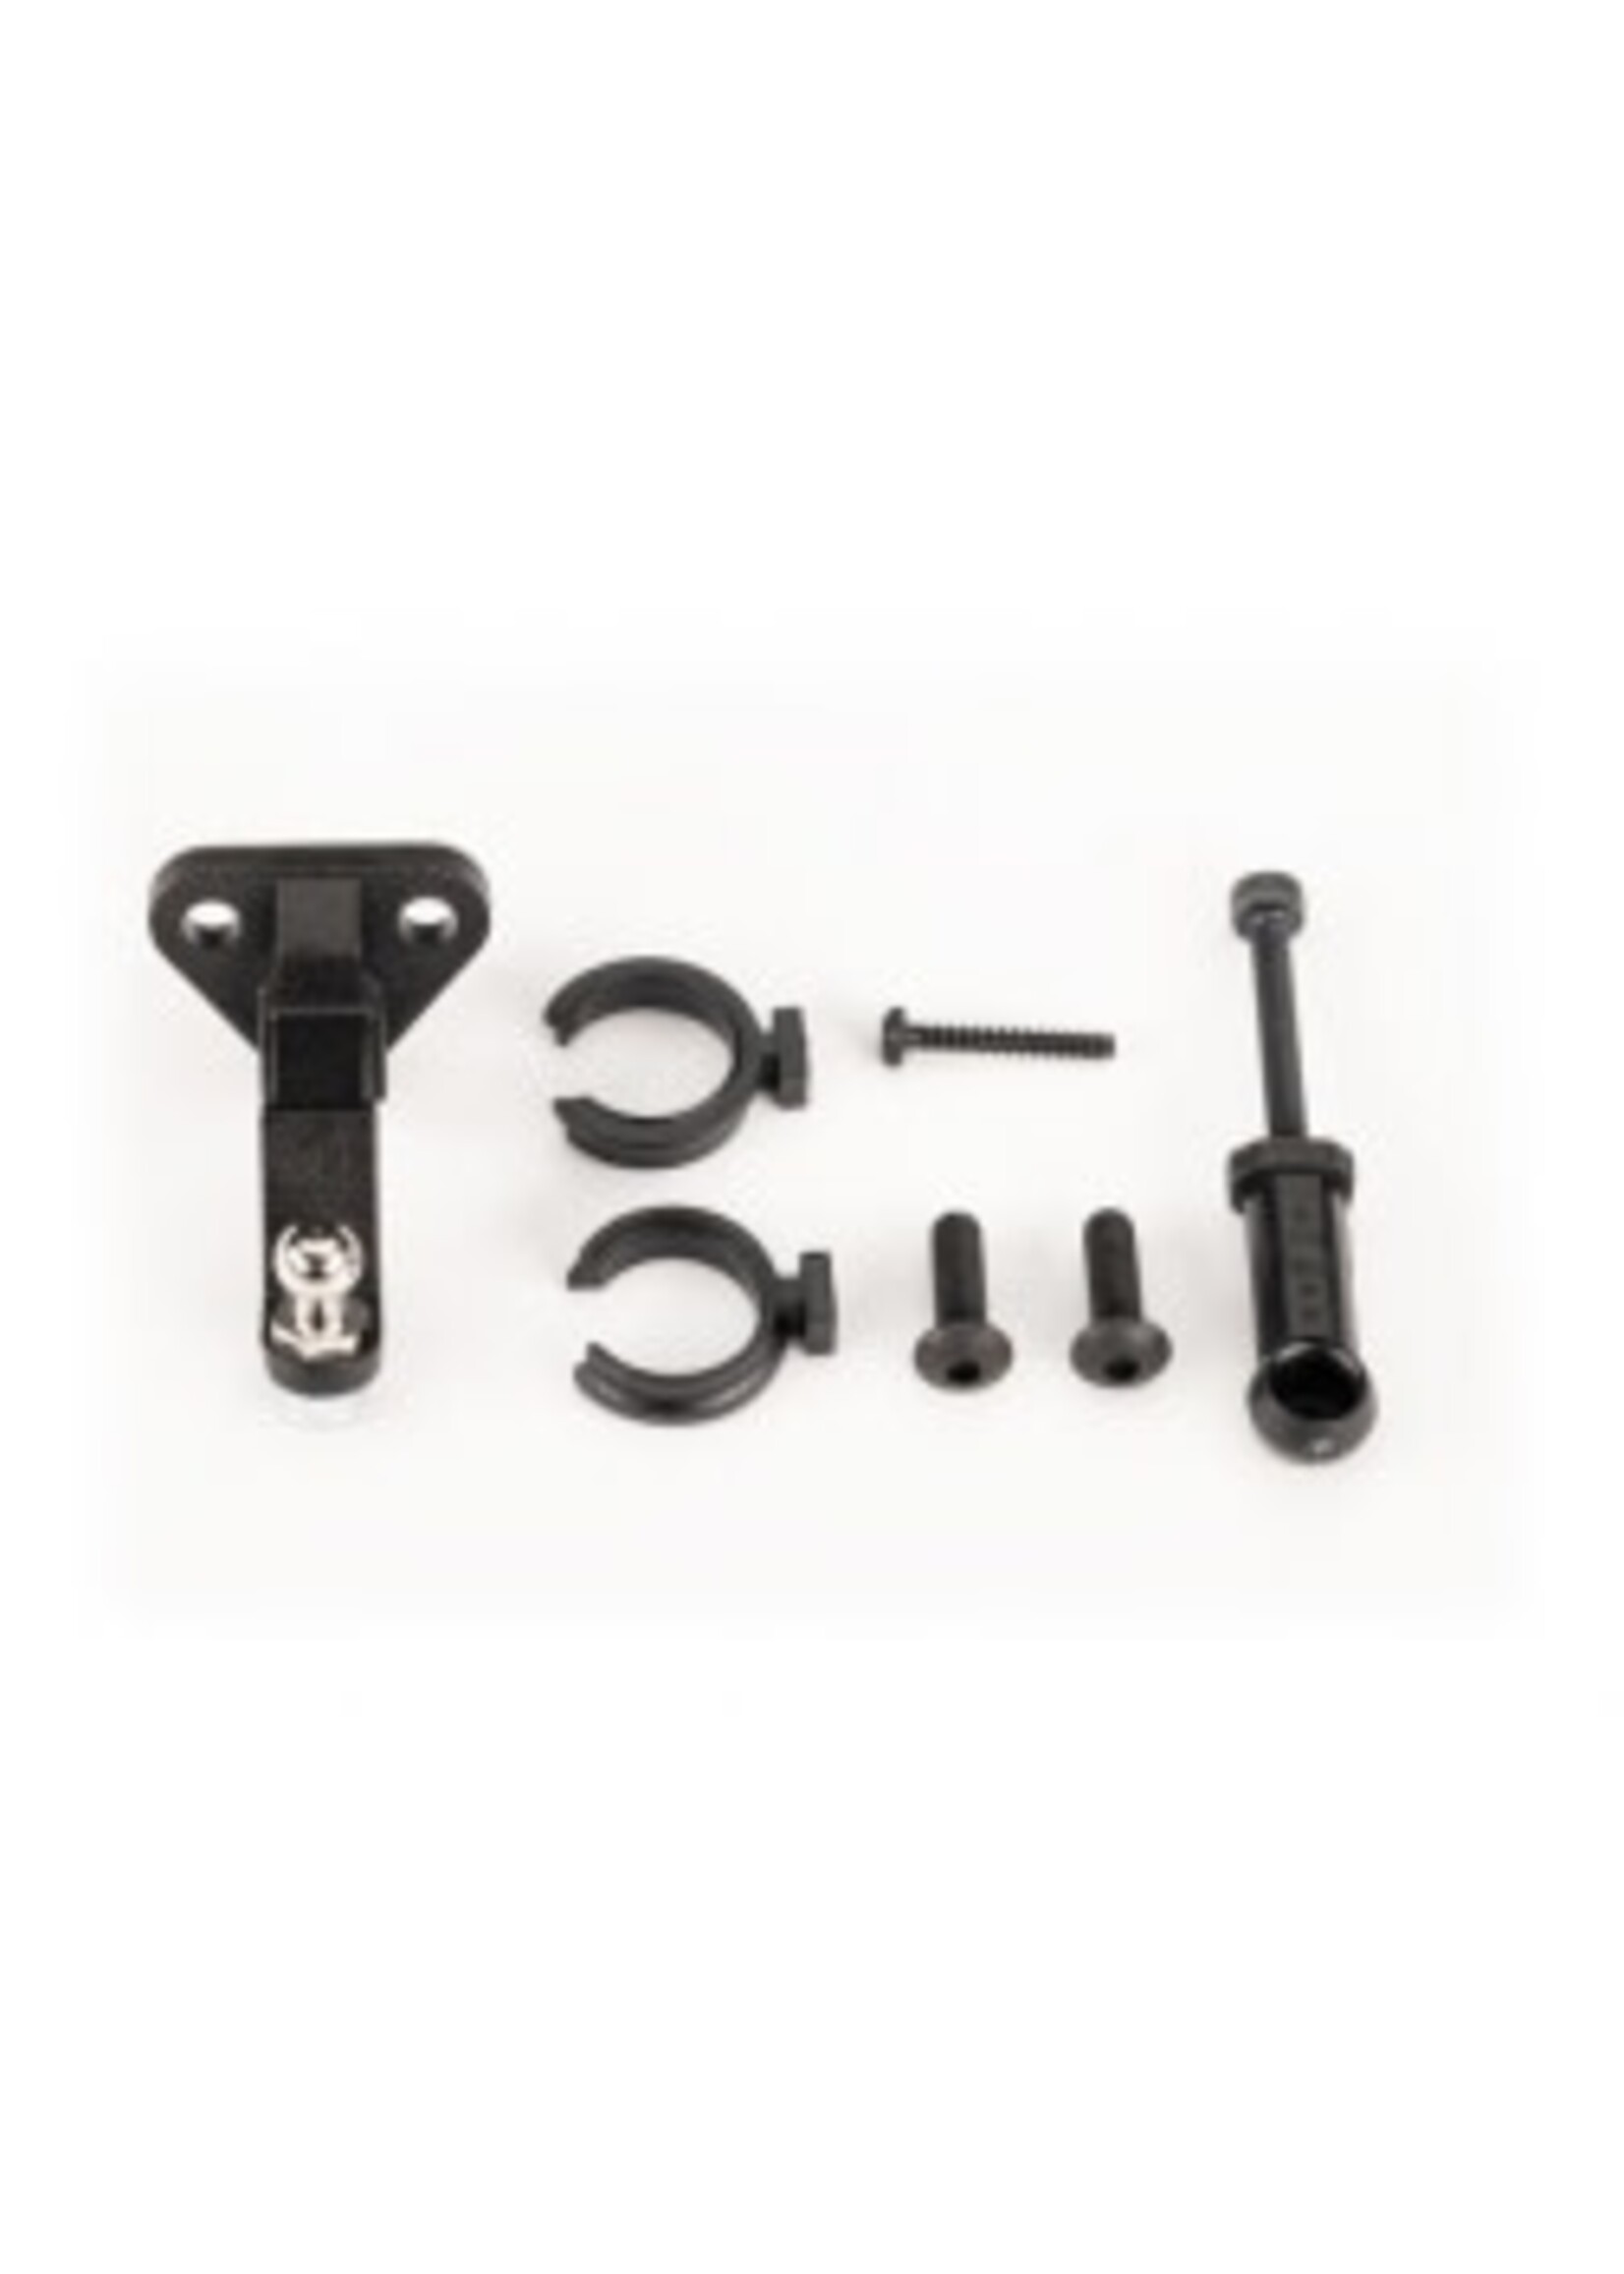 Traxxas 9796 Trailer hitch for TRX-4M™ trucks includes hitch, coupler, 3 mm pre-load spacers